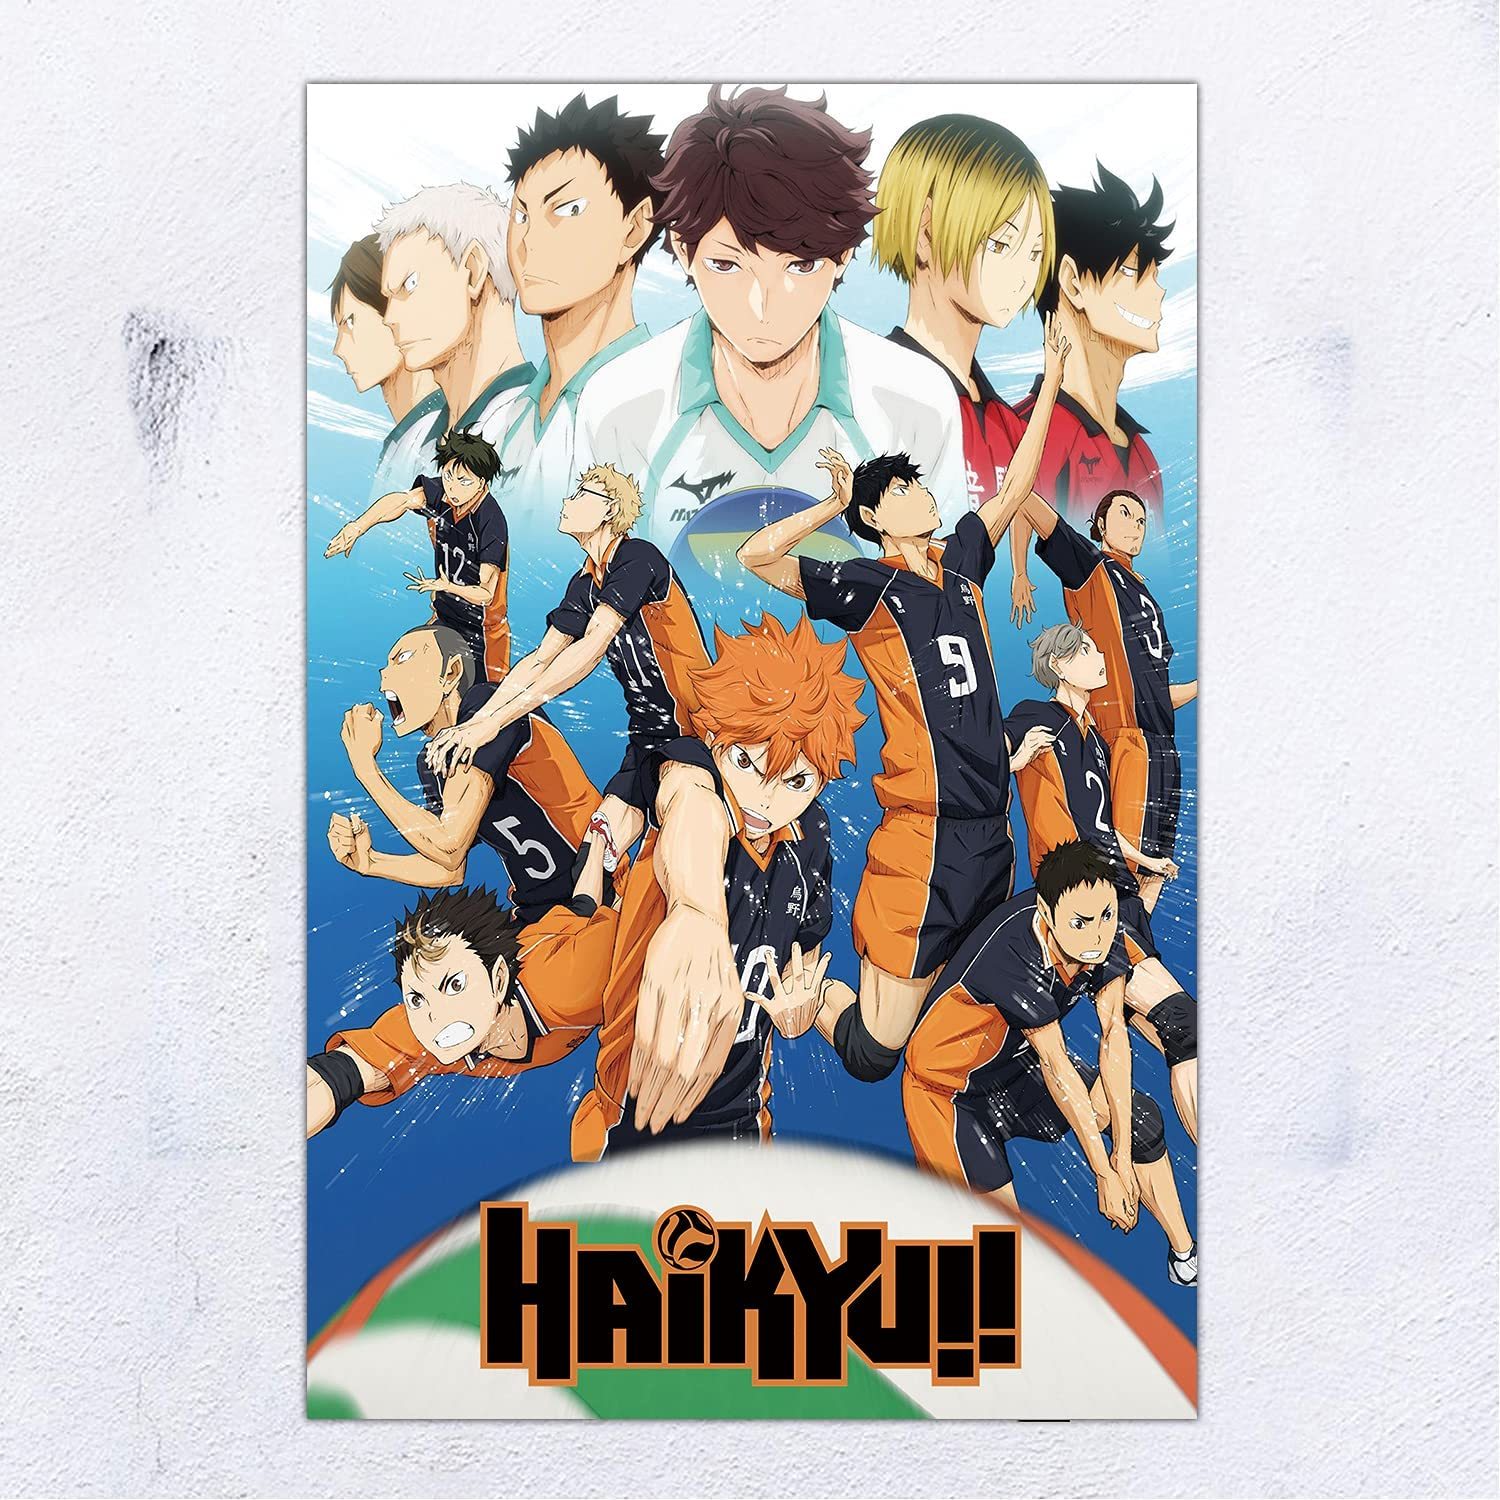 Haikyuu Anime Poster And Prints Unframed Wall Art Gifts Decor 12X18" - $27.99